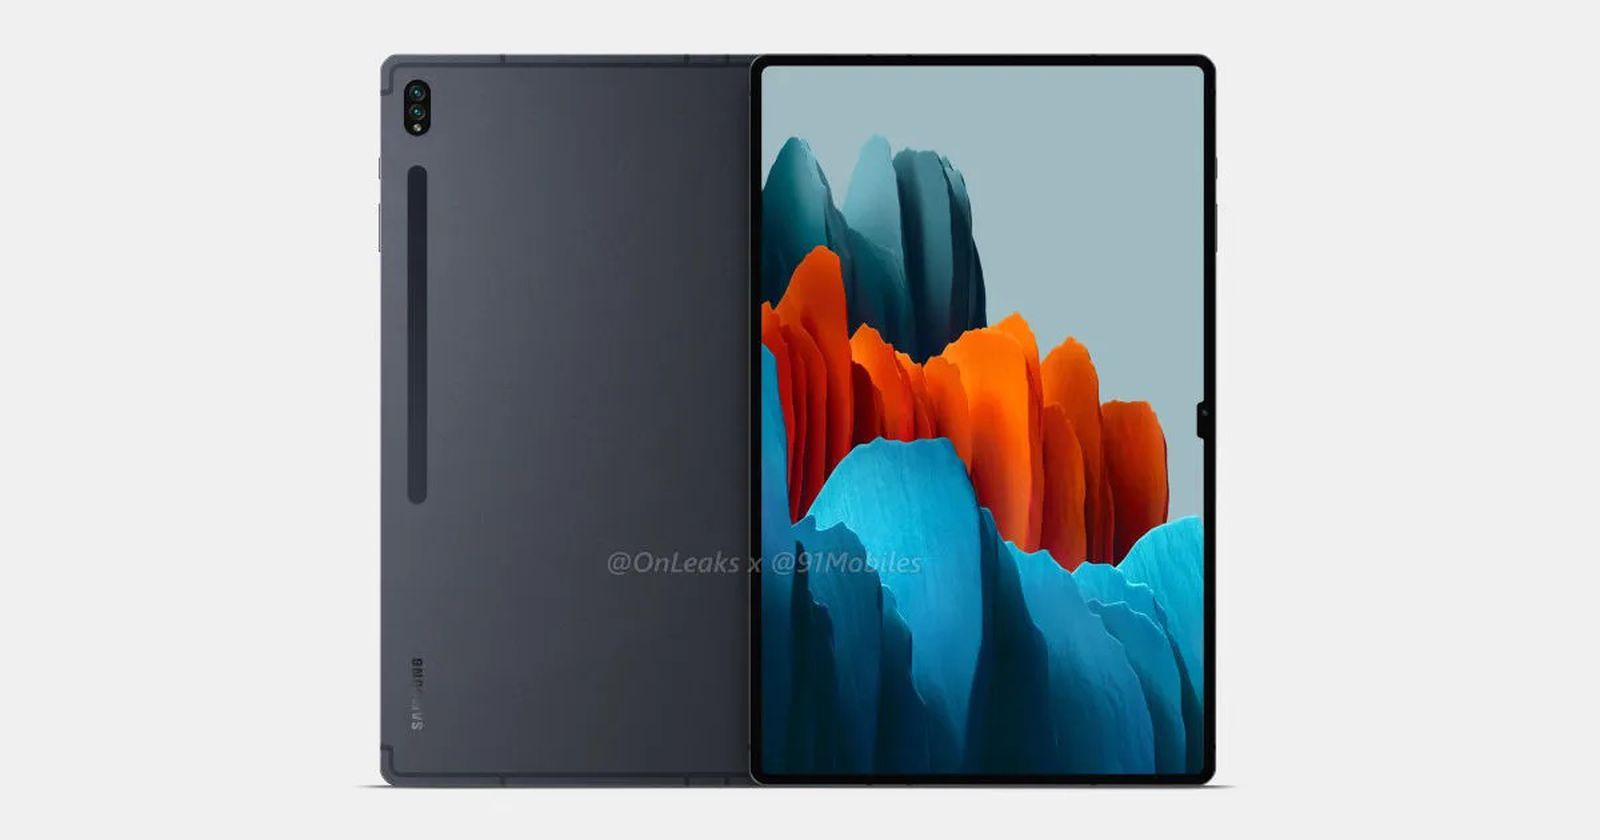 What's Notch to Like? Samsung Accidentally Leaks Its New Flagship Galaxy Tab - MacRumors